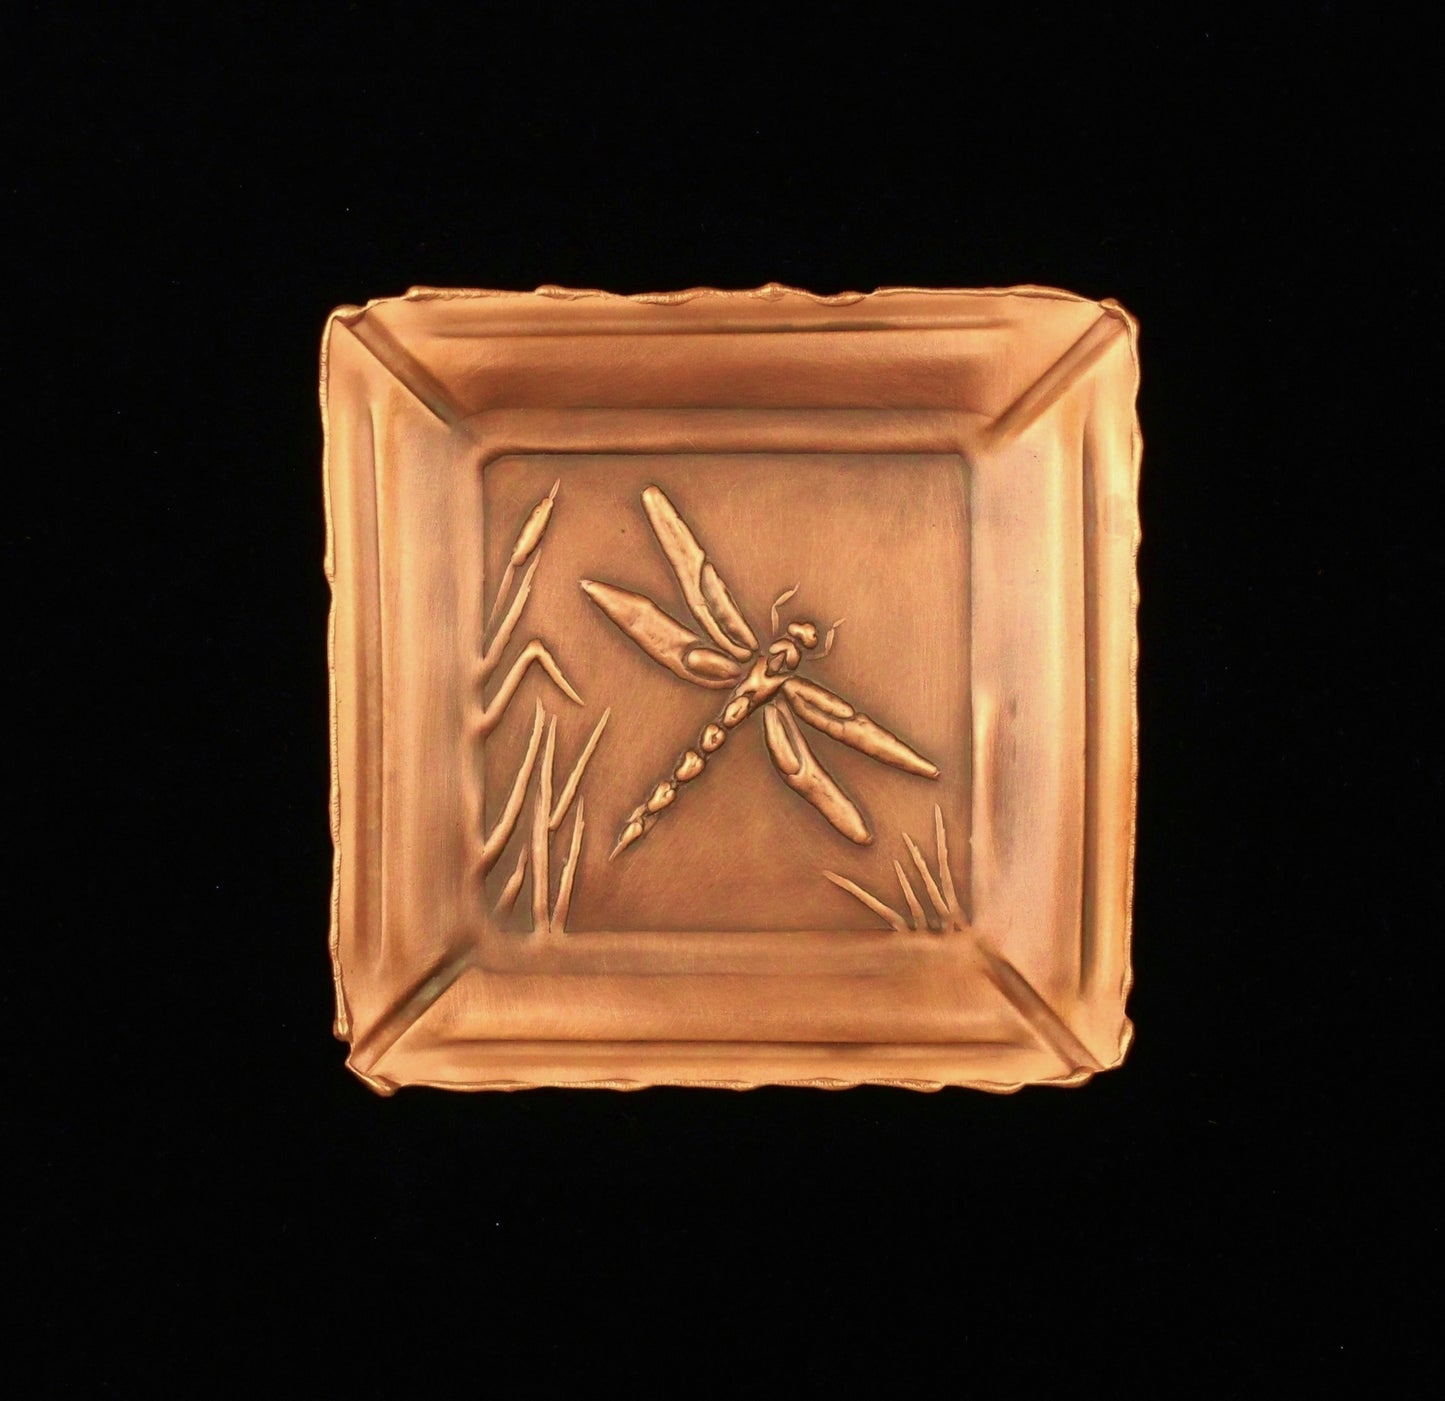 Dragonfly Copper Art Tile/Tray, 4" x 4"